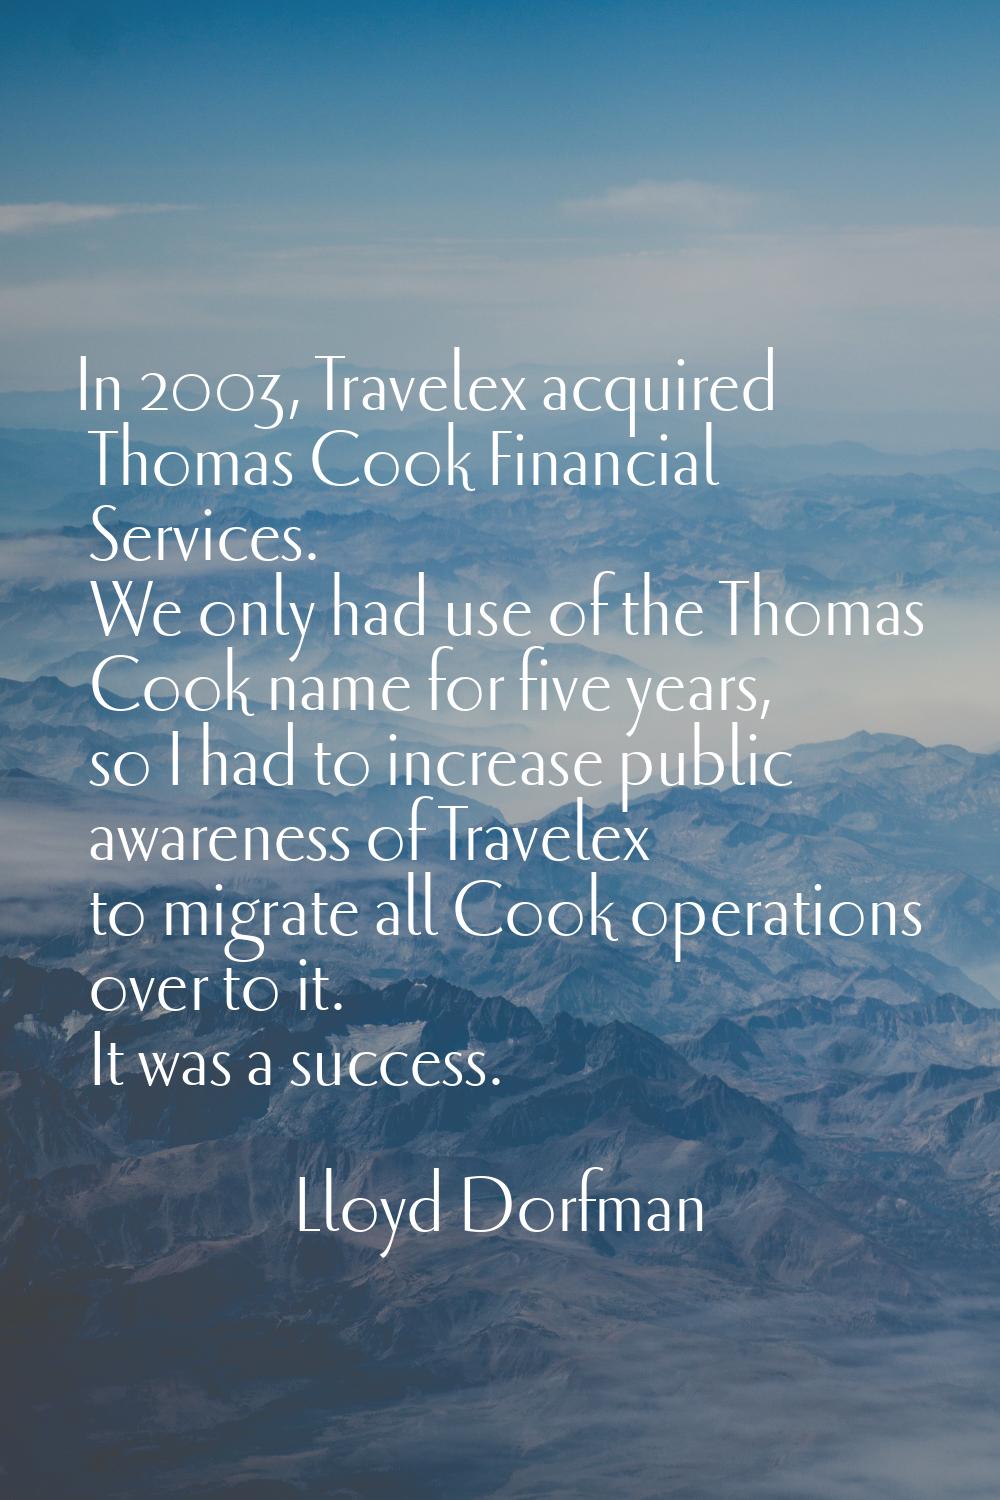 In 2003, Travelex acquired Thomas Cook Financial Services. We only had use of the Thomas Cook name 